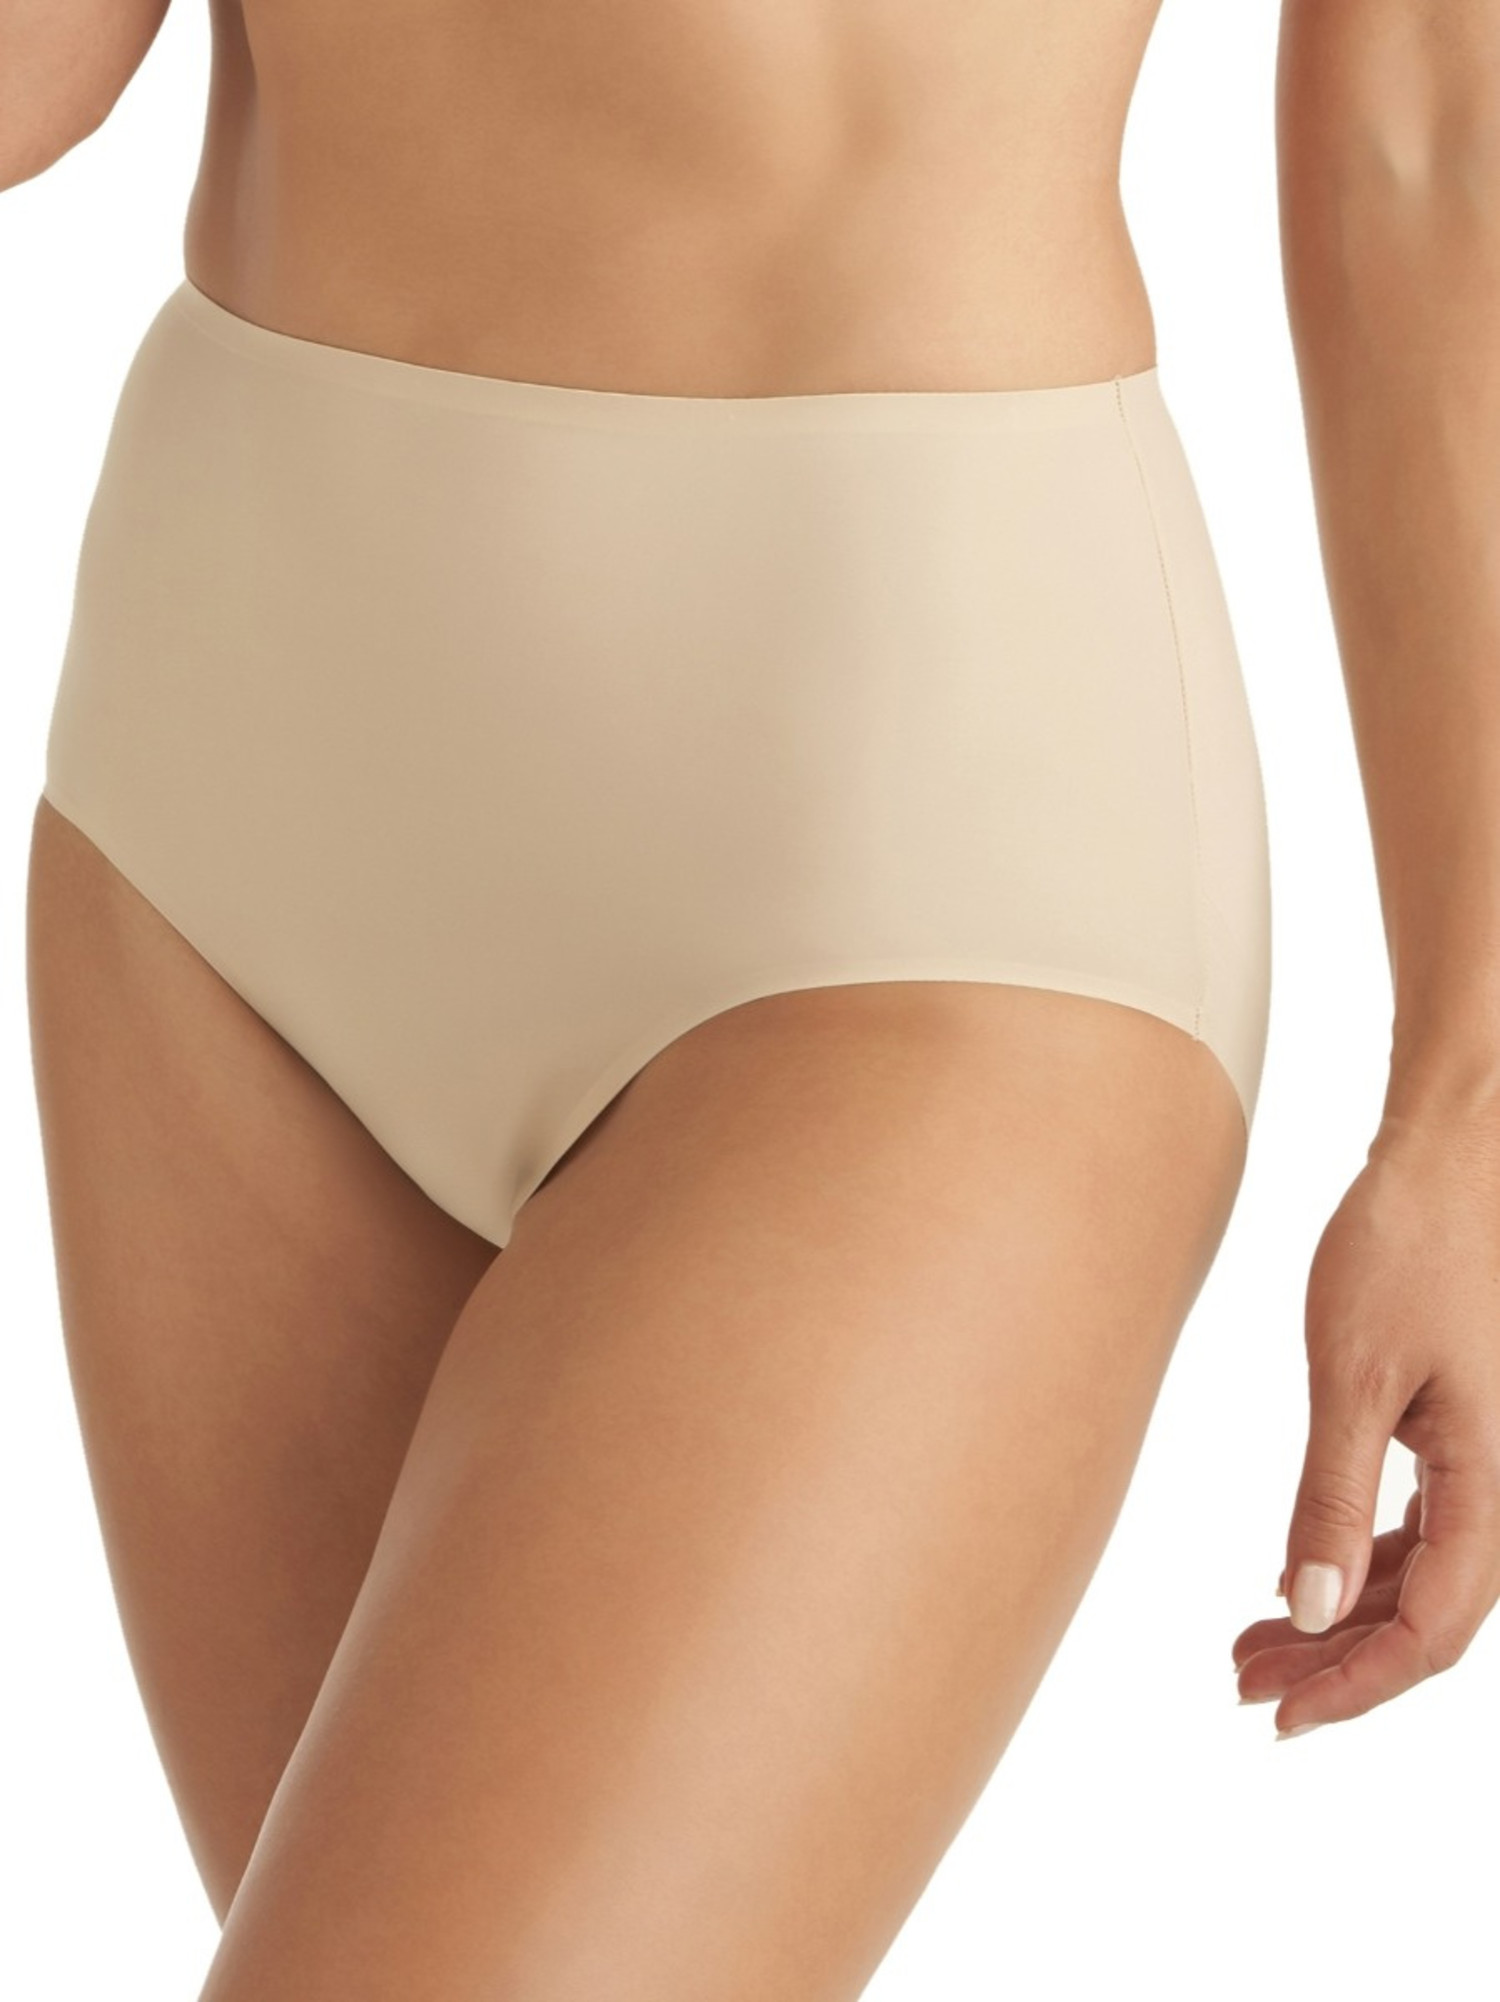 Modern Brief Panties A4-115 Warm Beige - Lace & Day